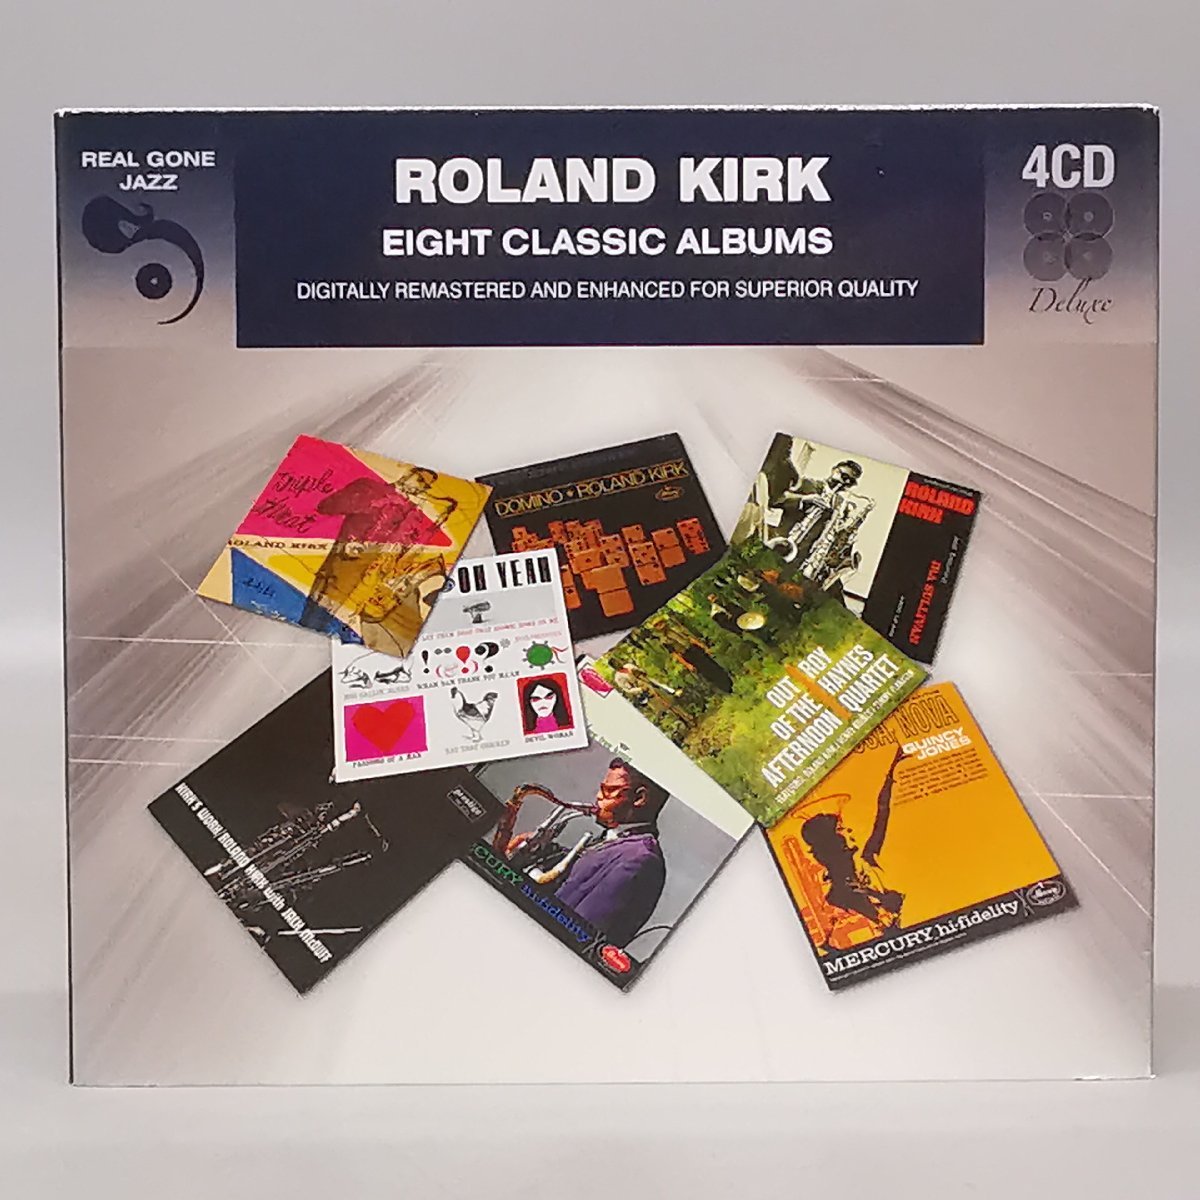 ROLAND KIRK CD4枚組 EIGHT CLASSIC ALBUMS / REAL GONE JAZZ ローランド・カーク Z4089_画像1